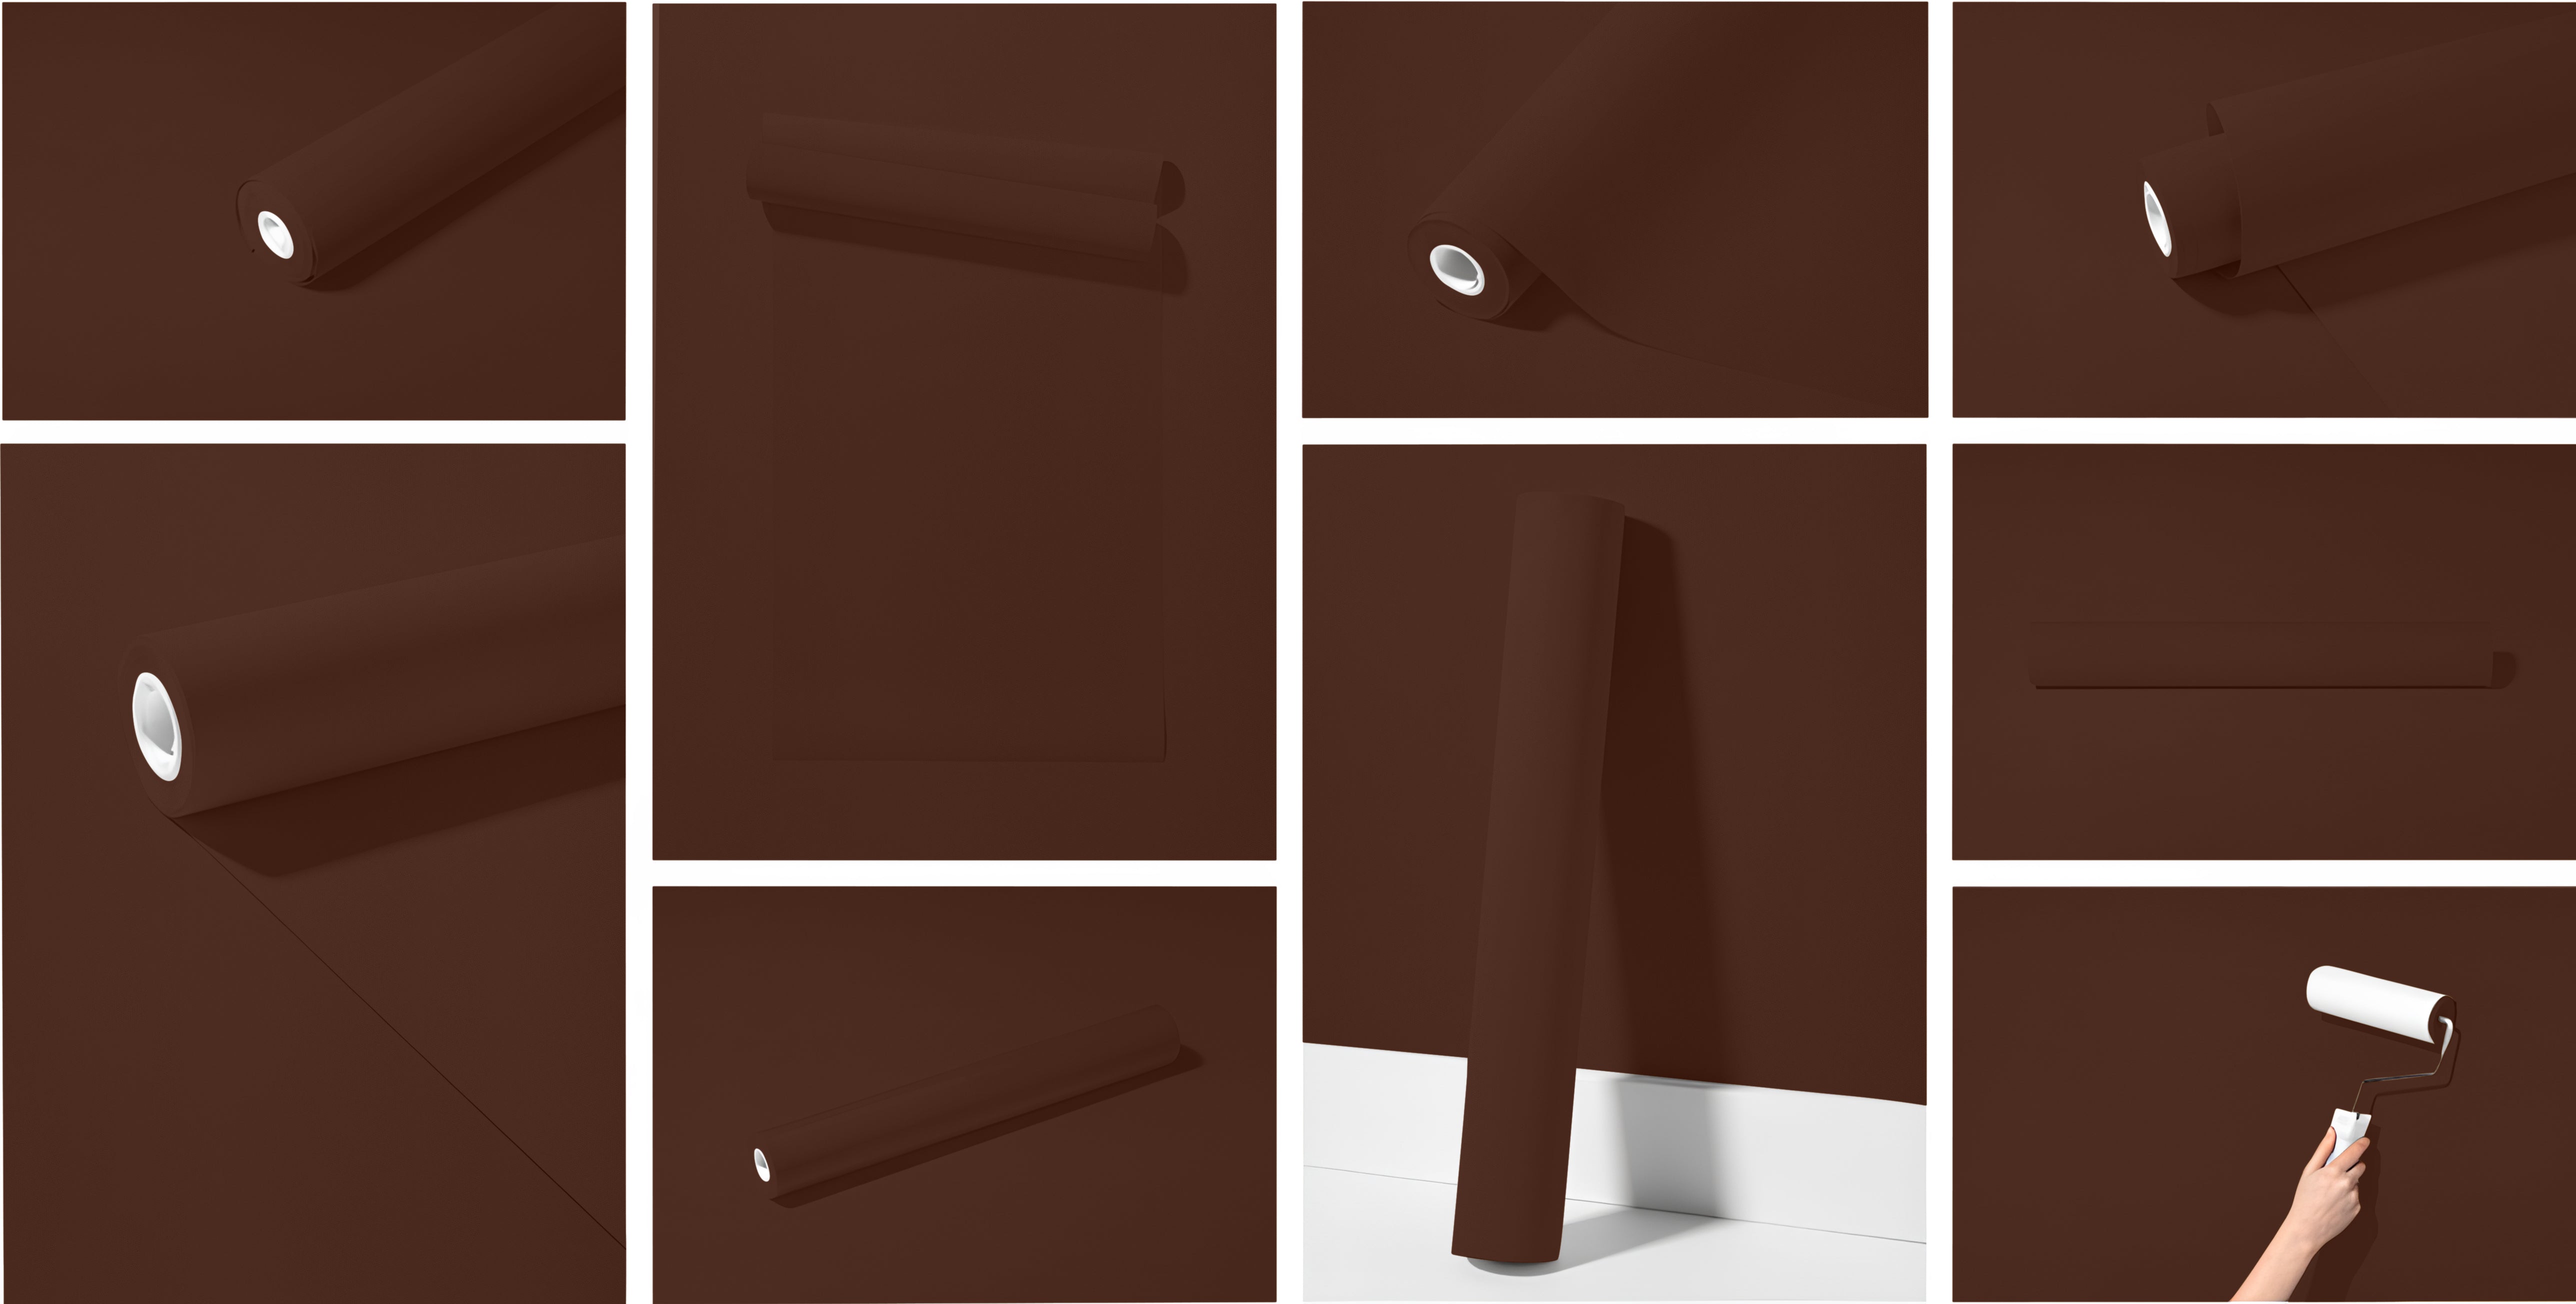 Peel & Stick Removable Re-usable Paint - Color RAL 8016 Mahogany Brown - offRAL™ - RALRAW LLC, USA